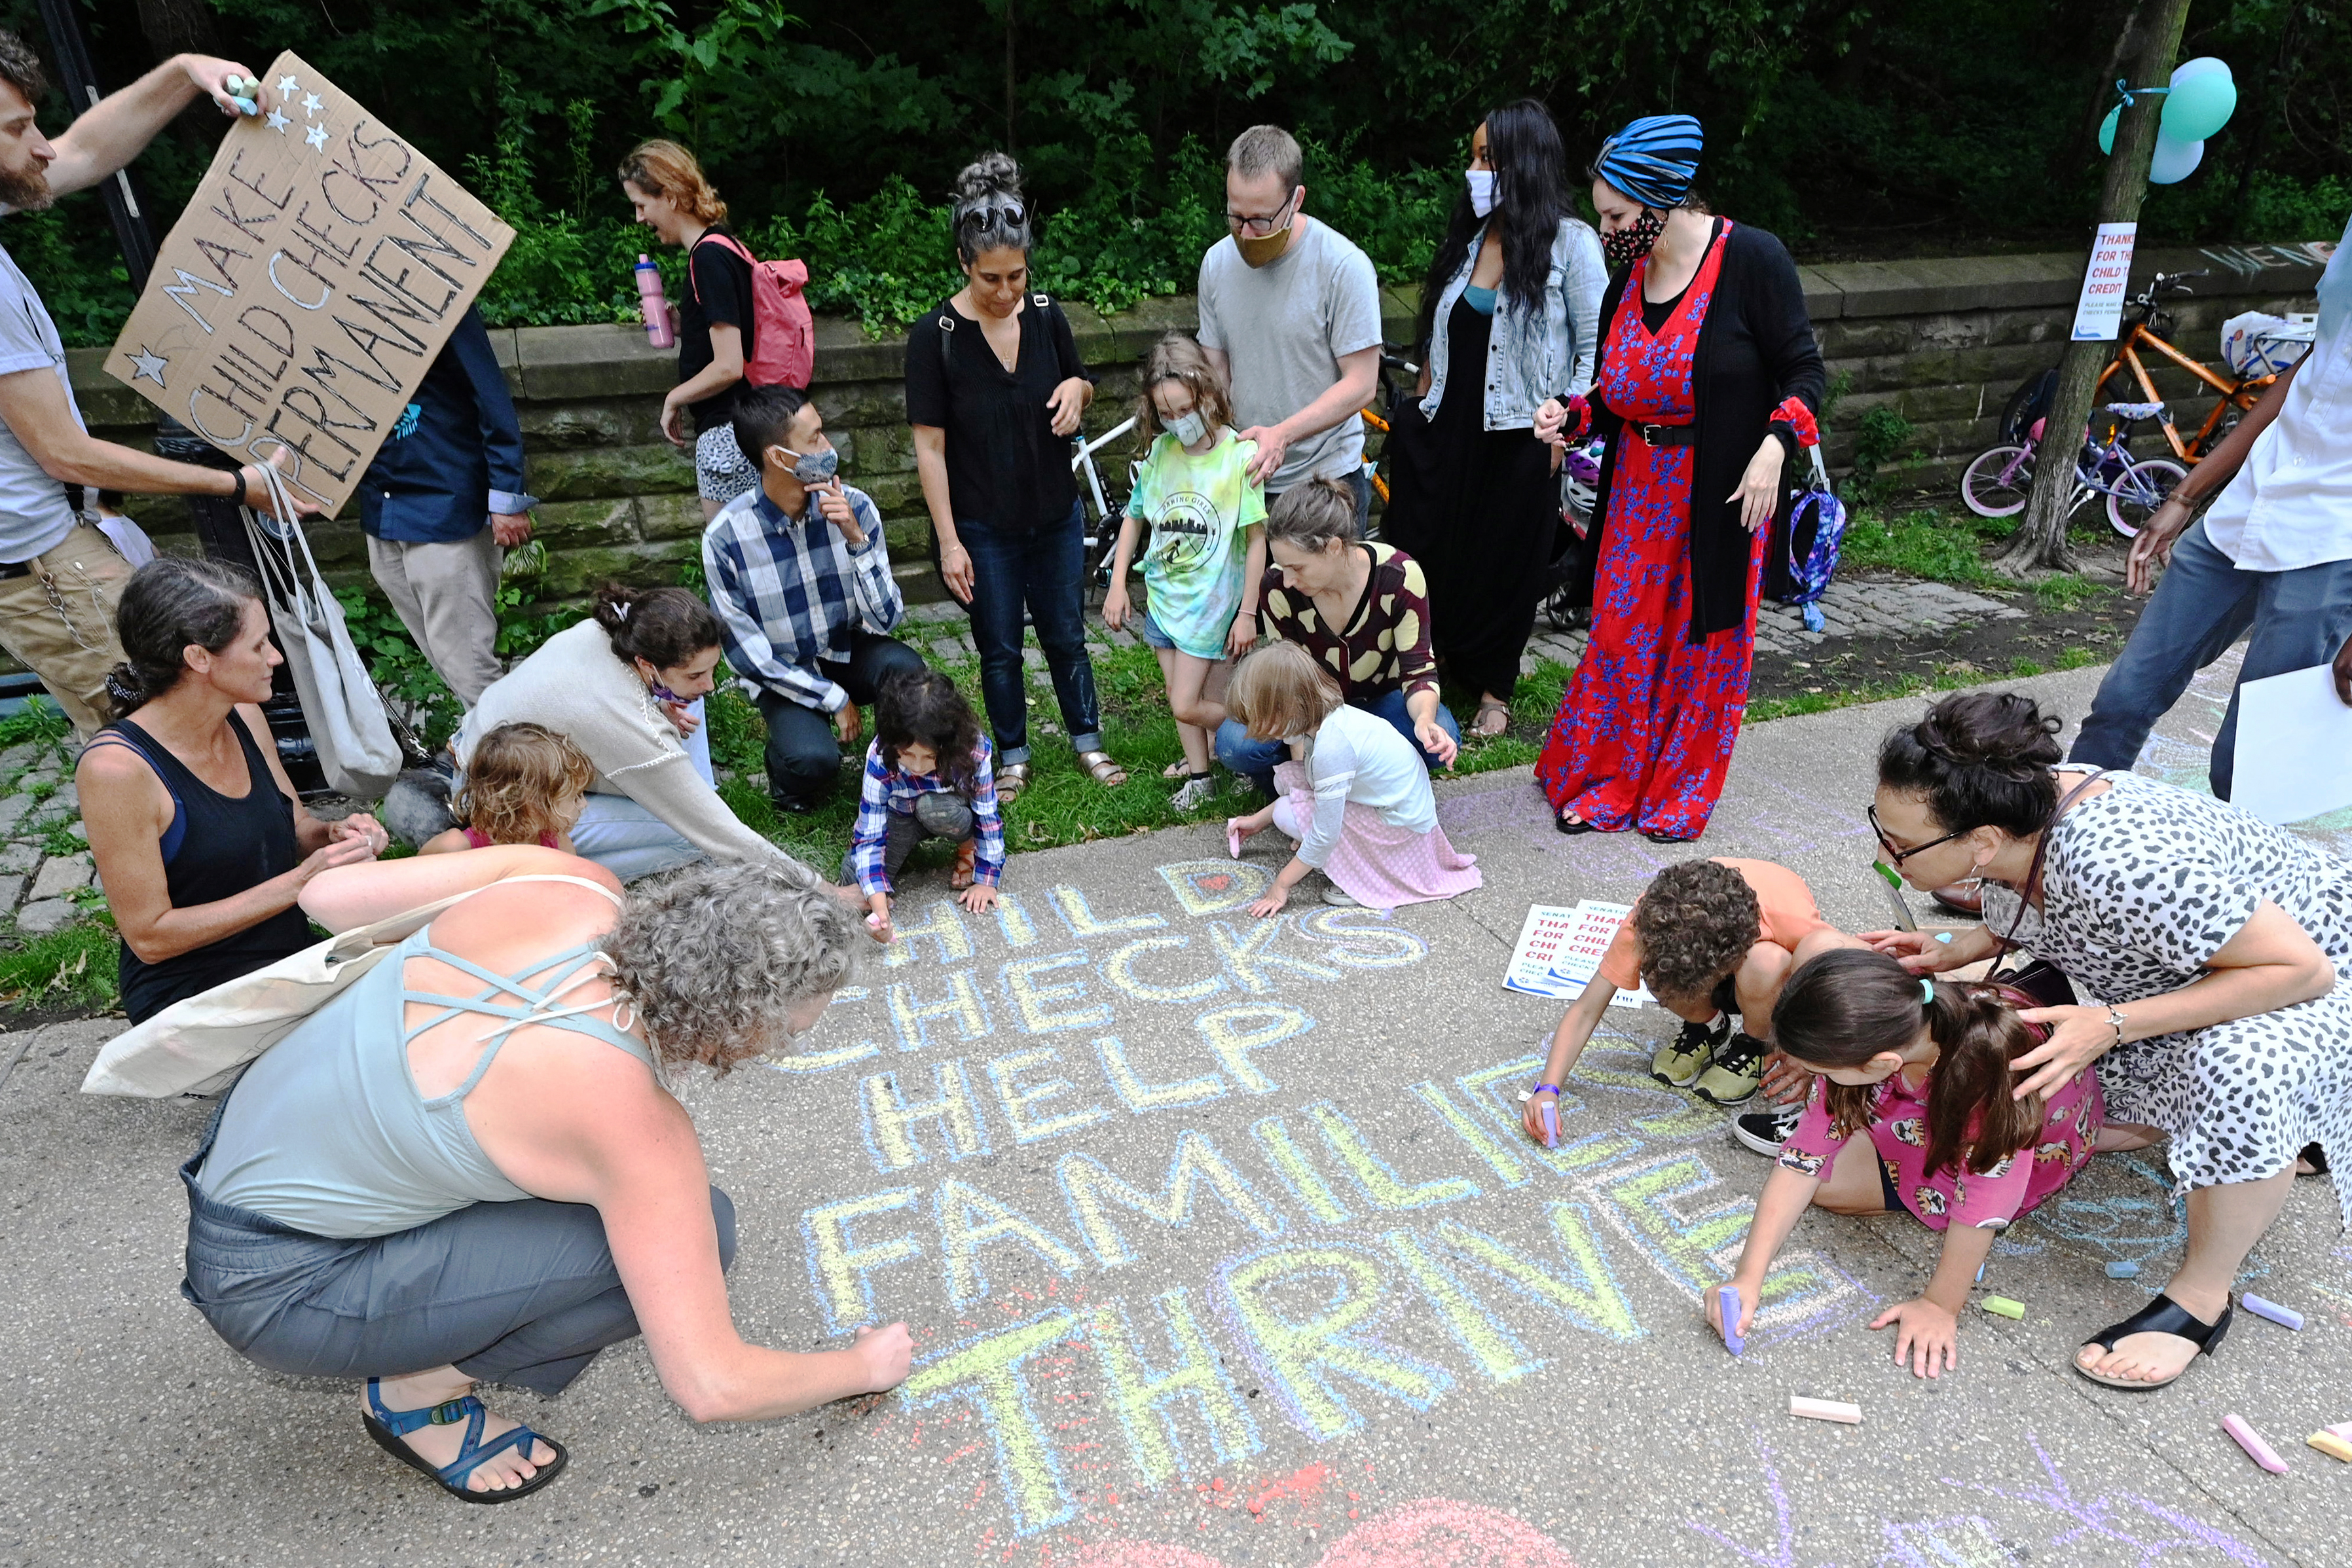 Adults and children use chalk to write “Child checks help families thrive” on the sidewalk.